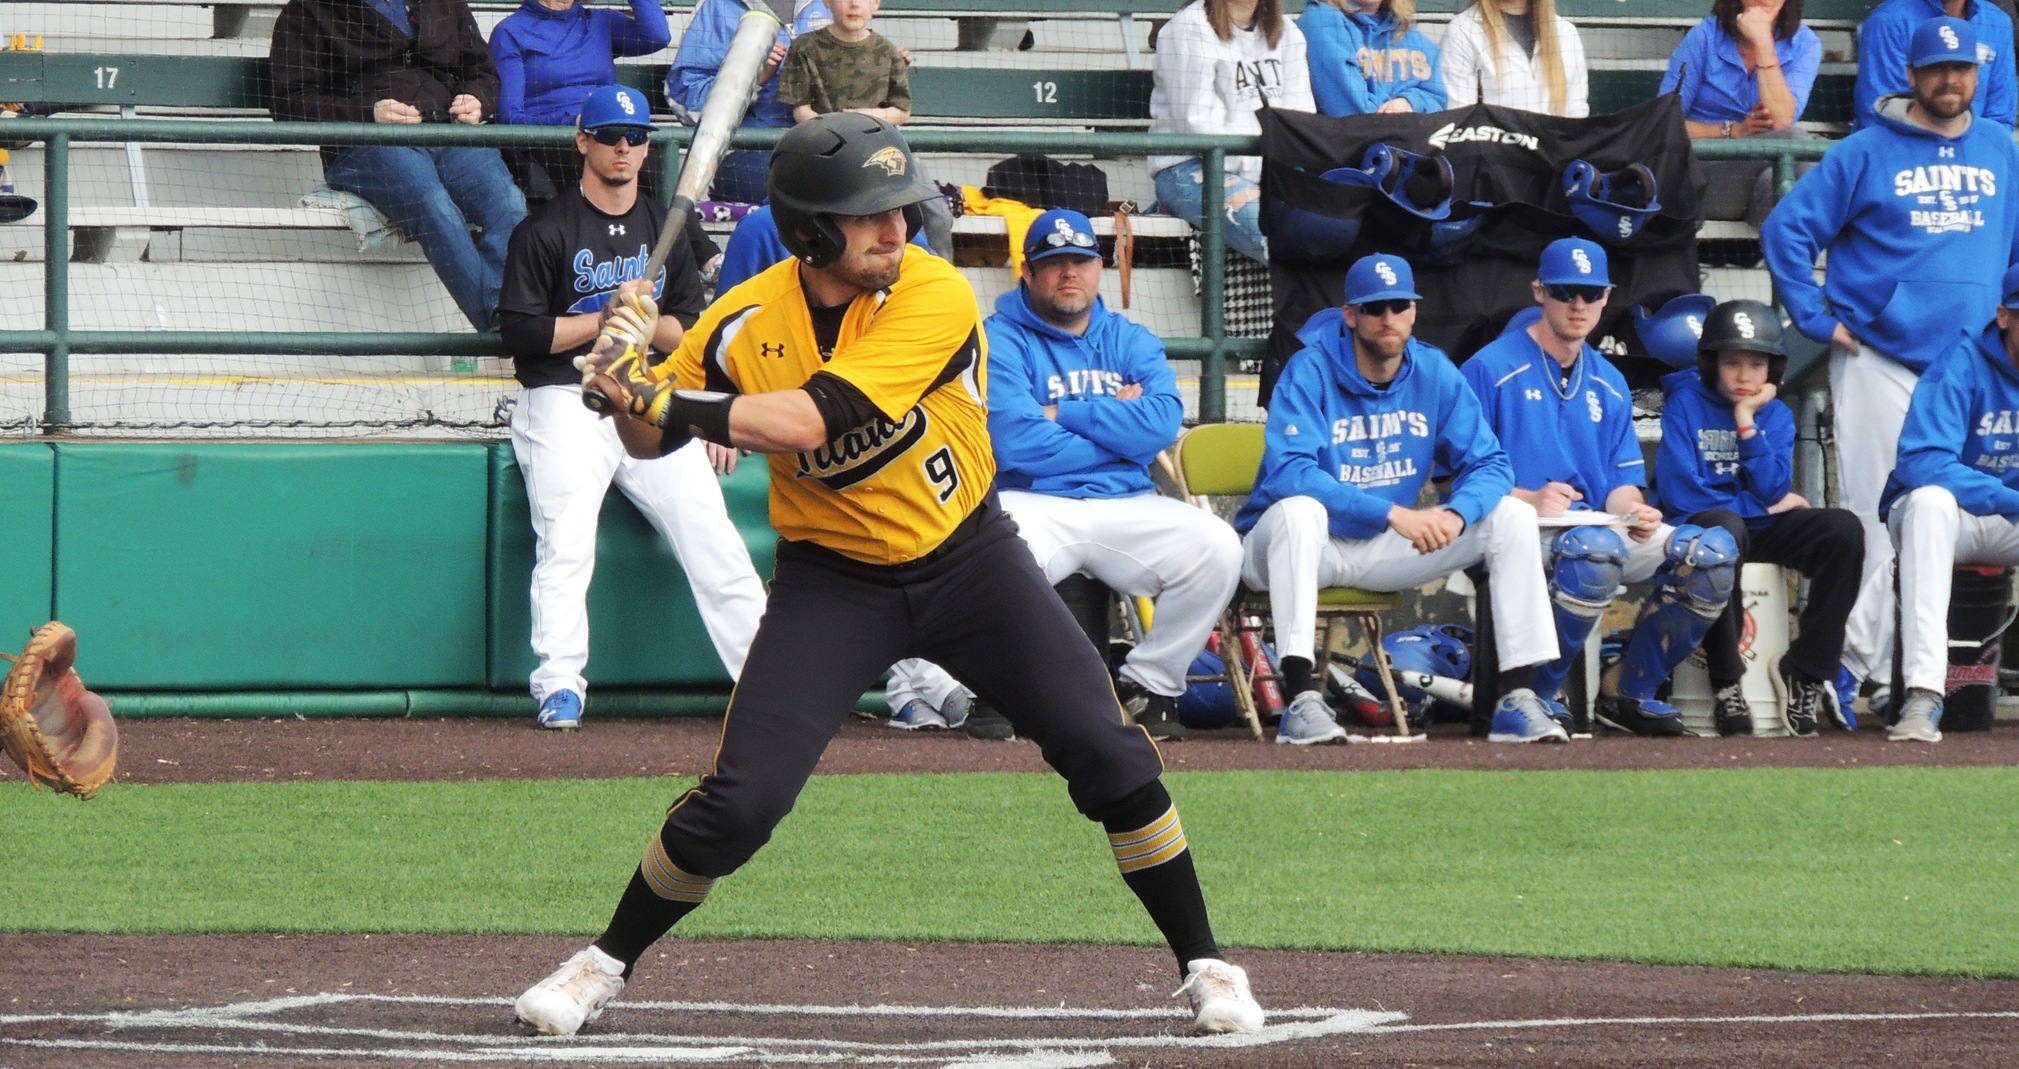 Tyler Kozlowski walked in four plate appearances against the Falcons.